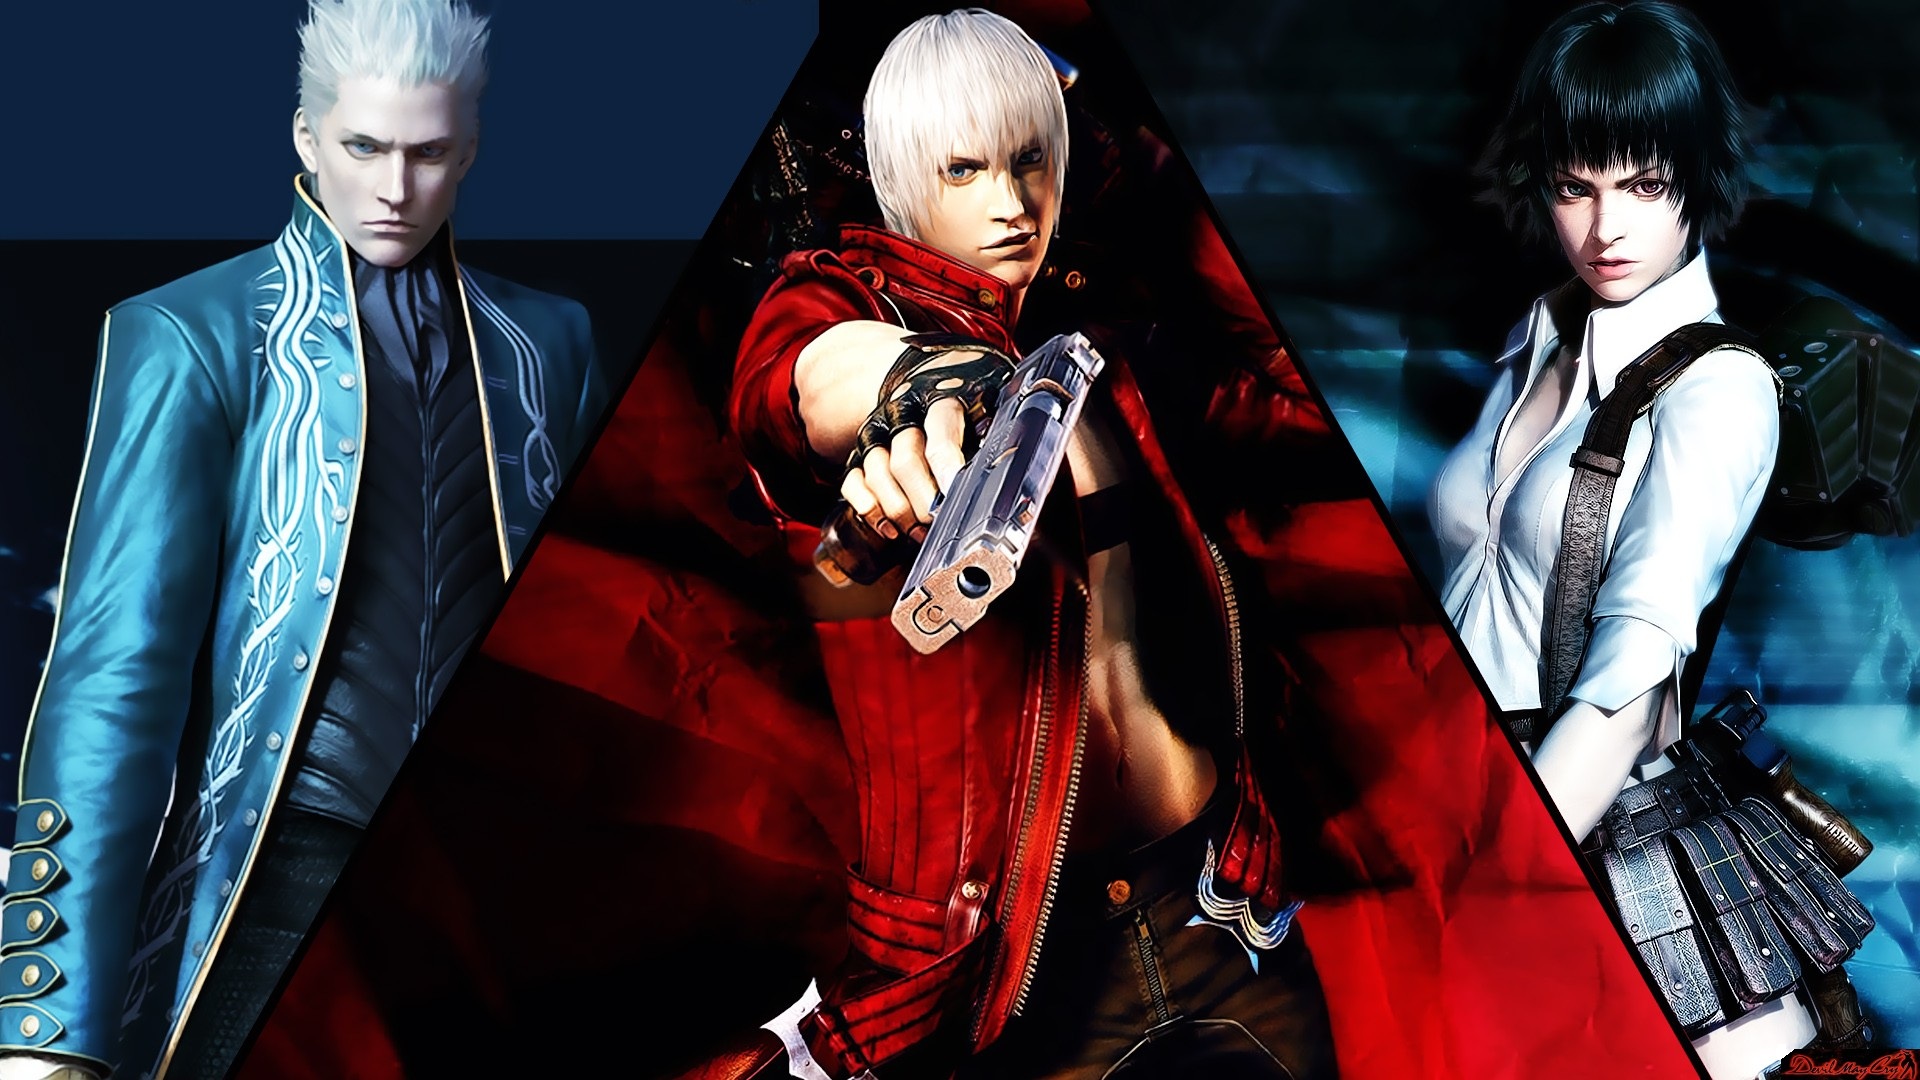 Devil may cry 3 can find steam фото 1